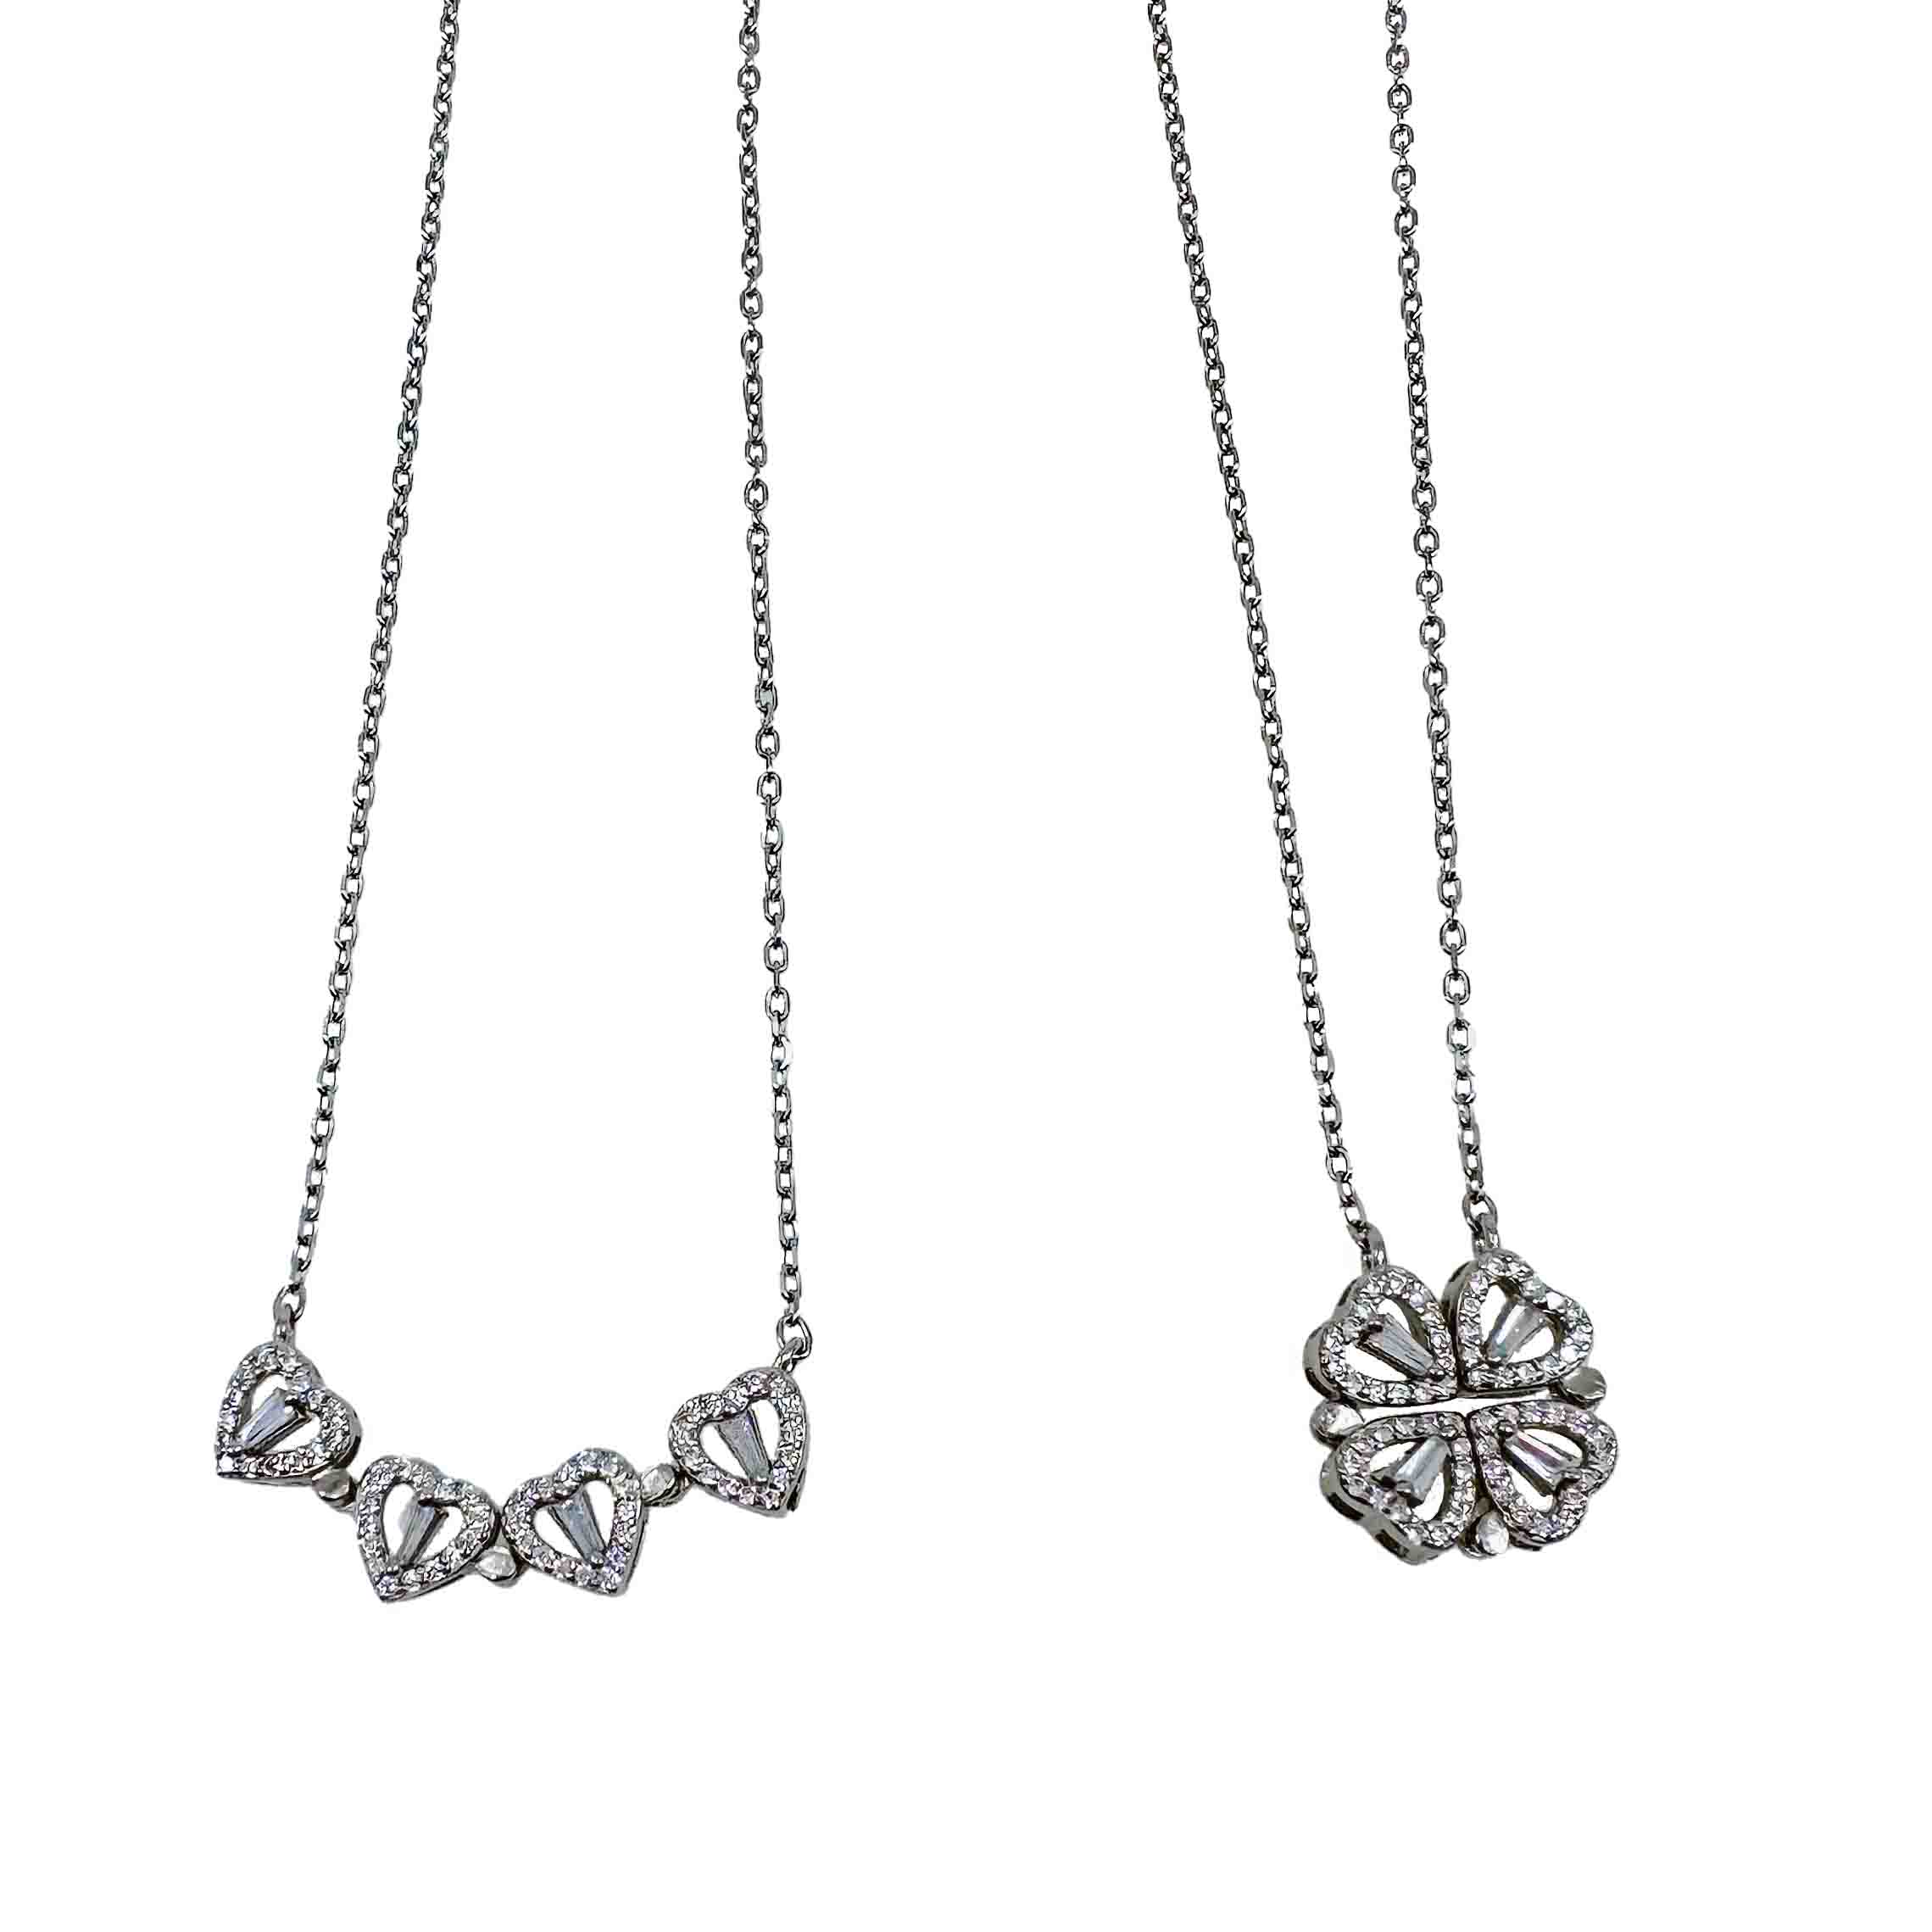 Changeable Magnetic 4 Leaf Clover and Heart Pendant Necklace Set .925 –  DezLin